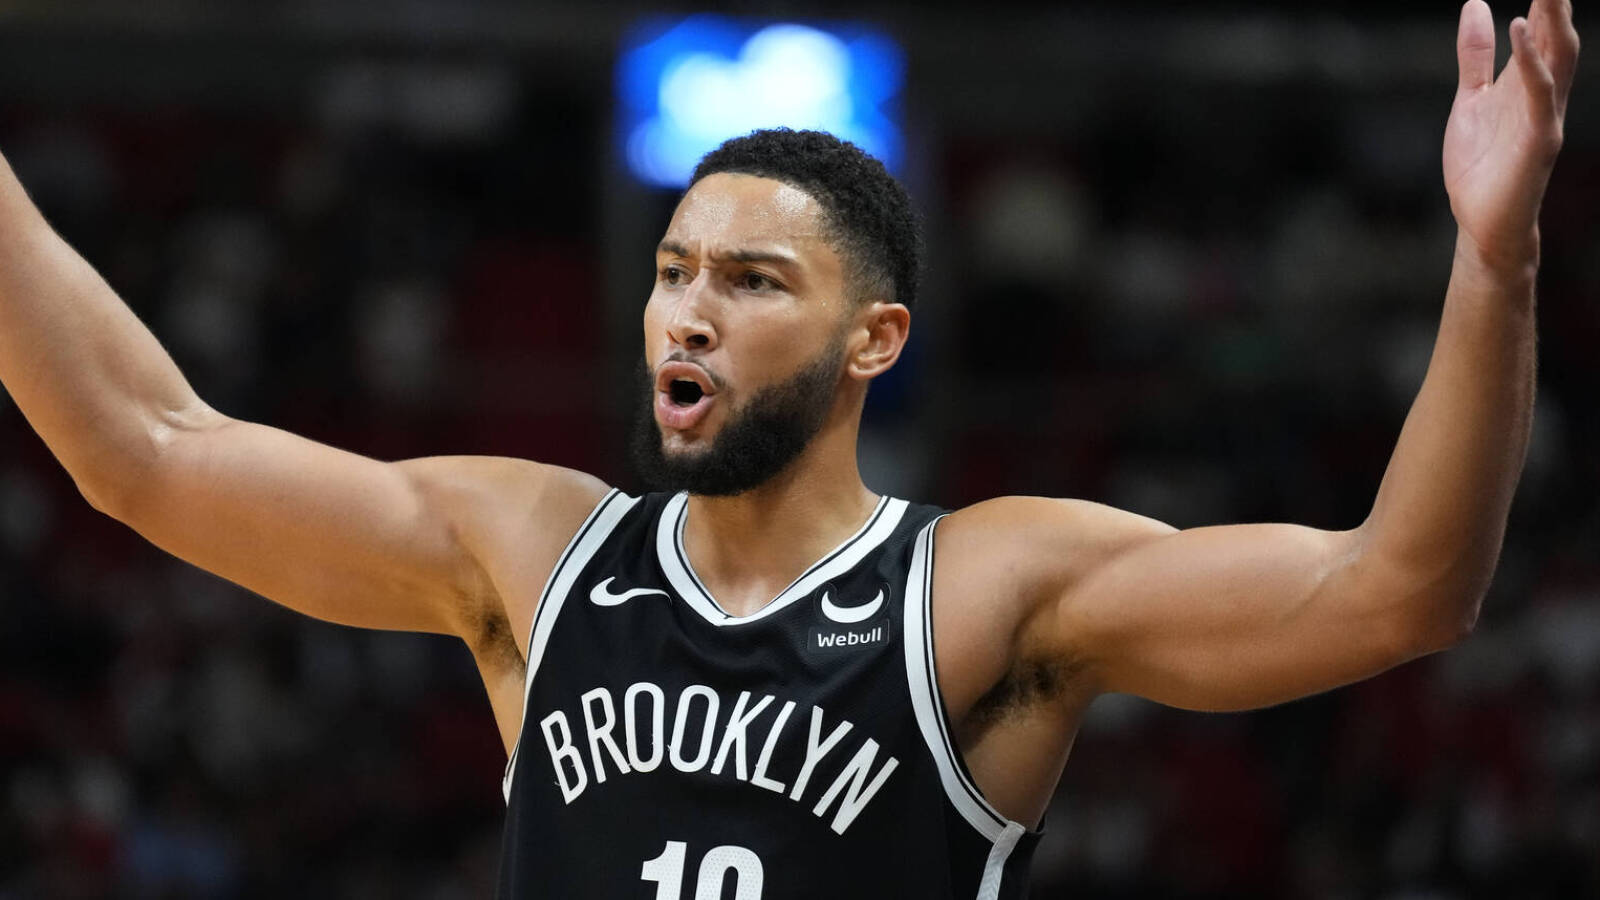 Another bizarre turn in Ben Simmons' saga as agent takes responsibility for PG's injury